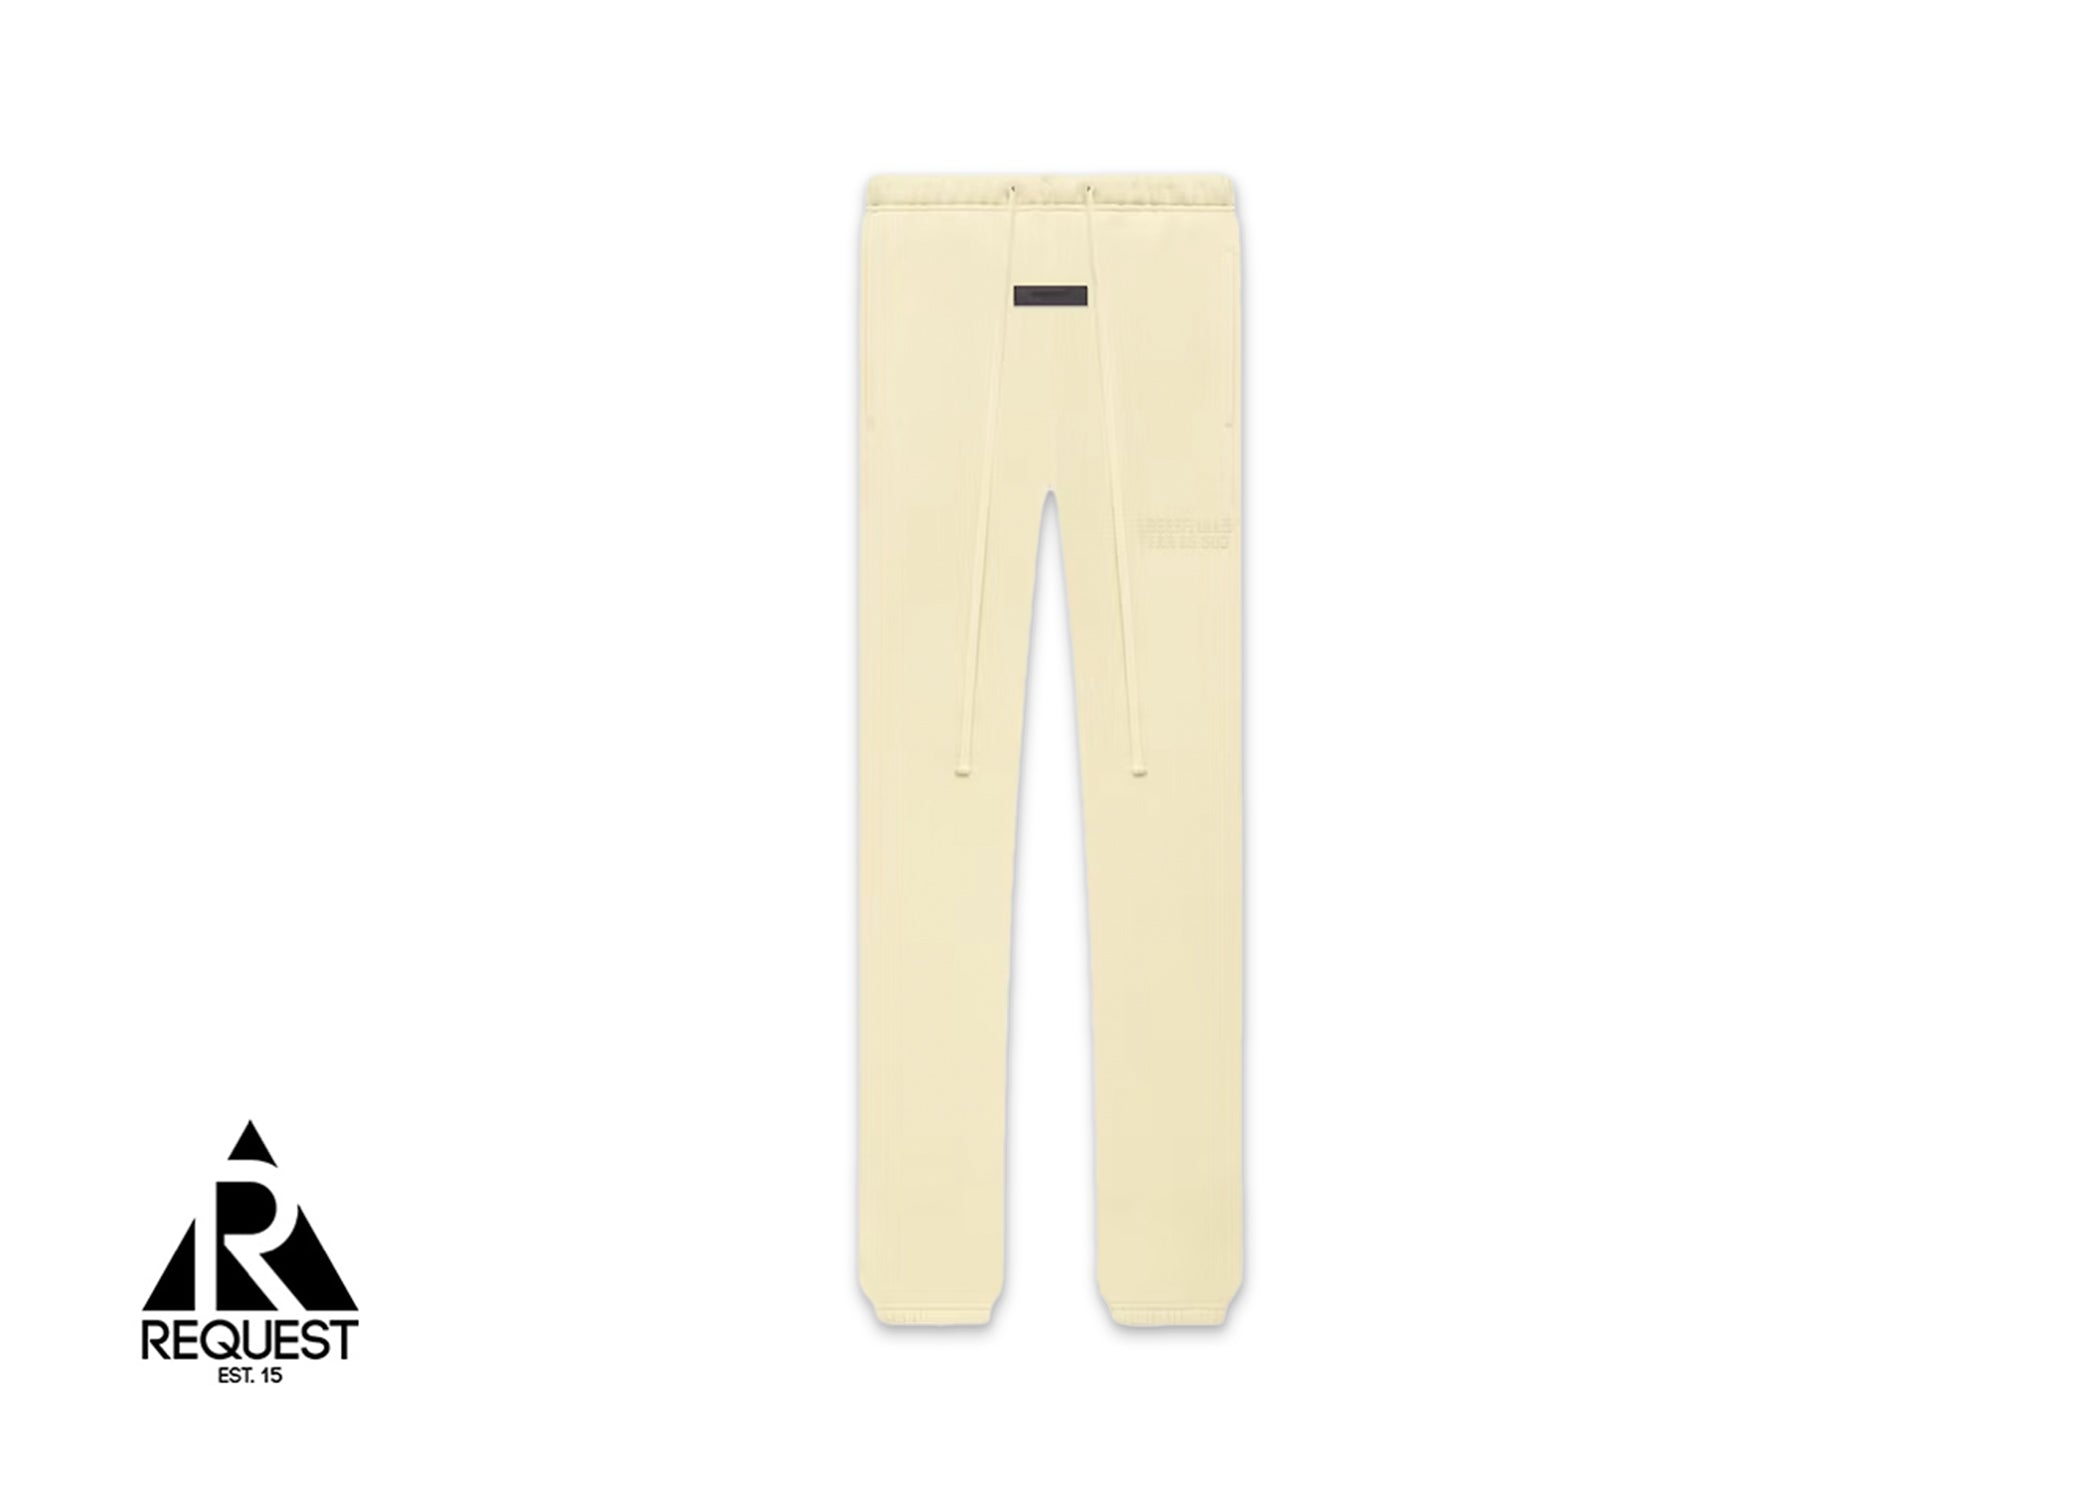 Fear of God Essentials Sweatpants “Canary”